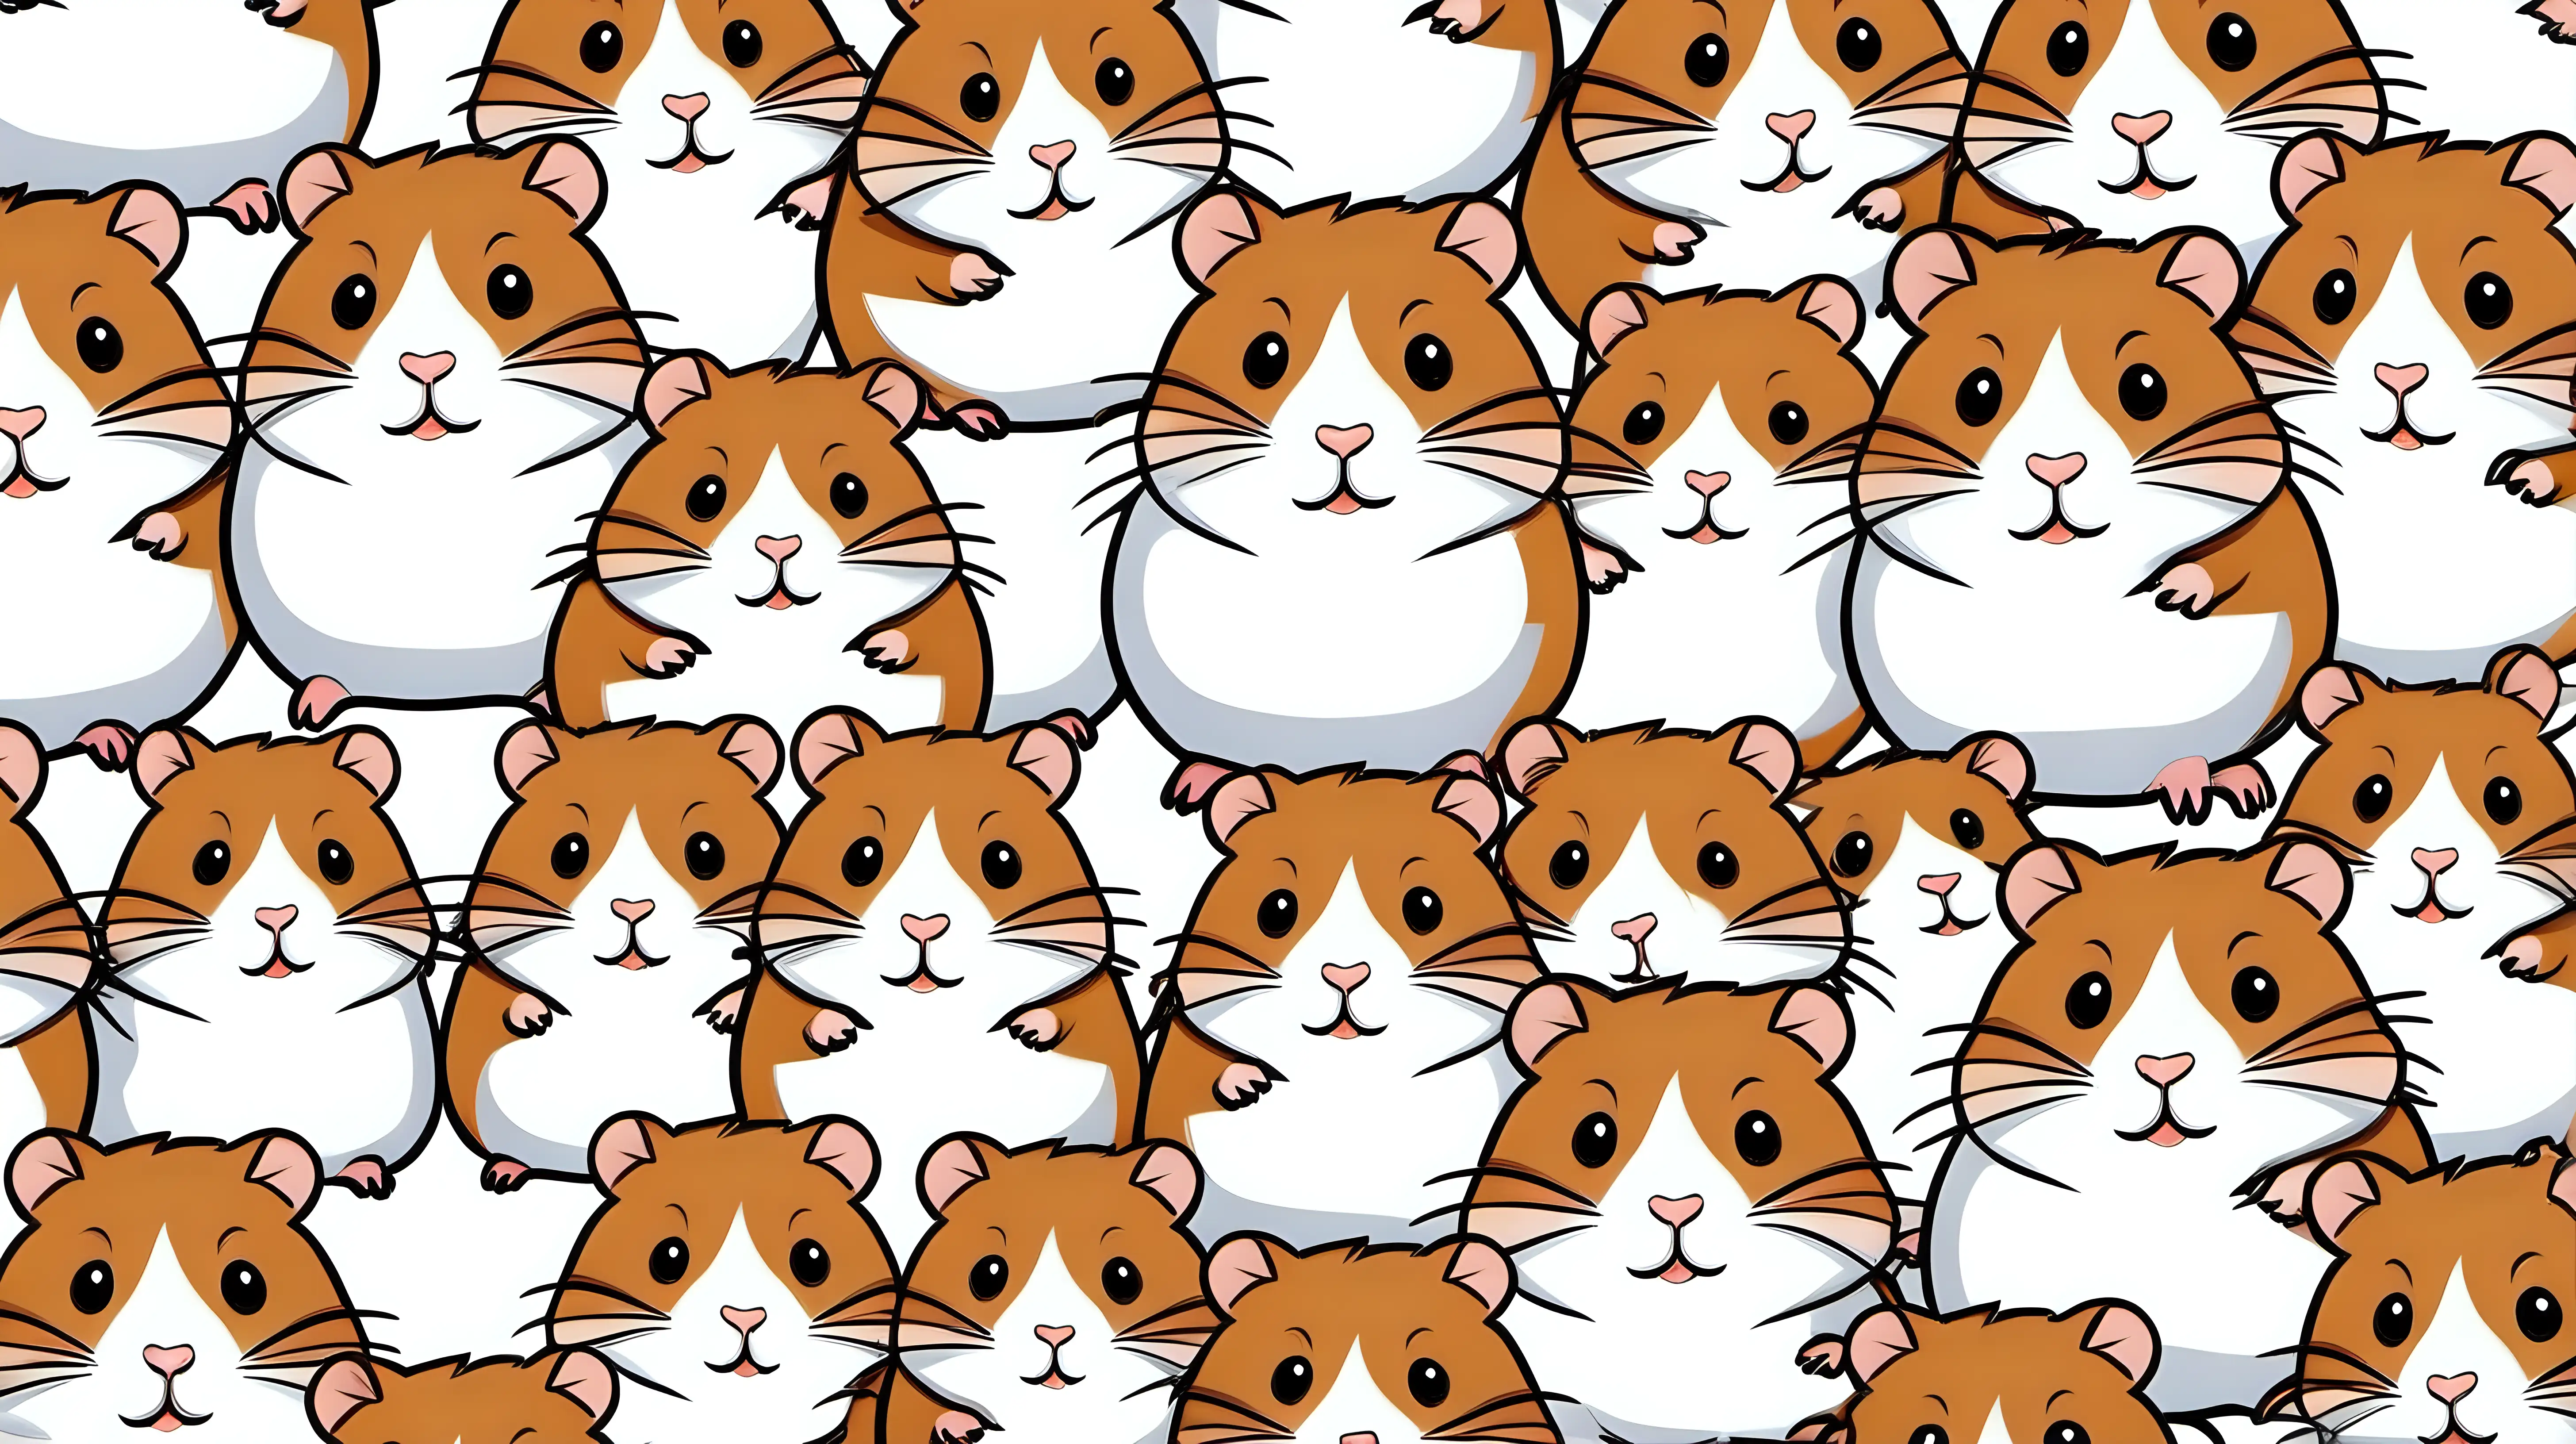 brown and white cute hamsters hand drawings pattern all over the image